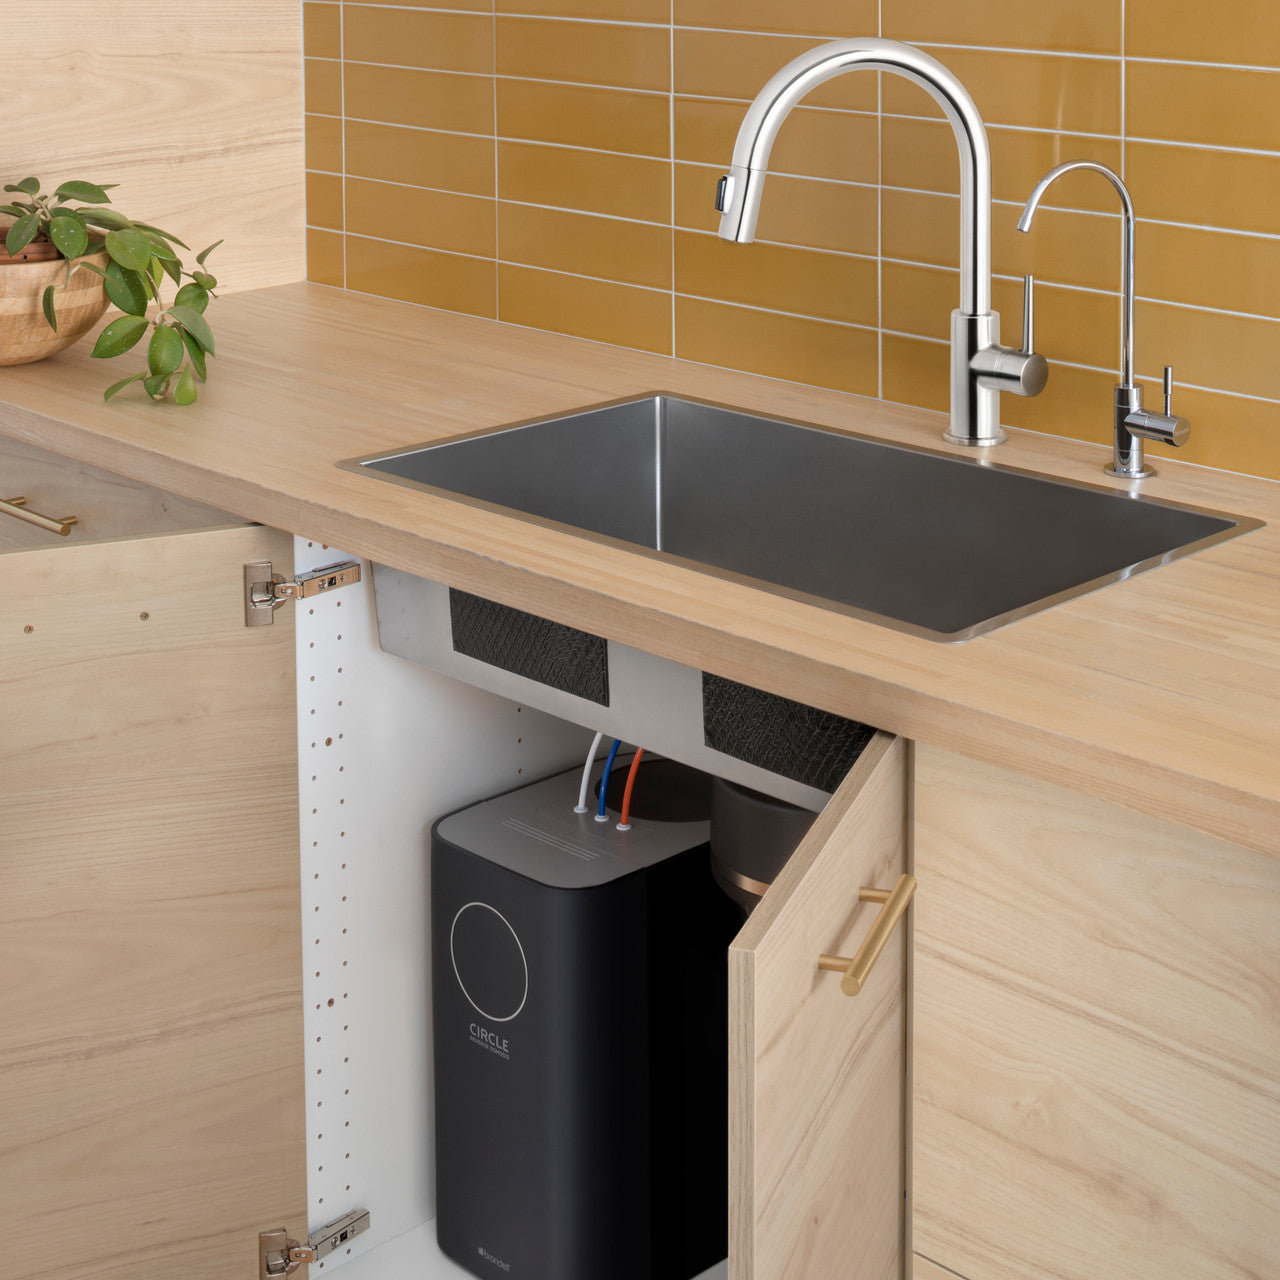 Cypress Countertop Water Filtration System